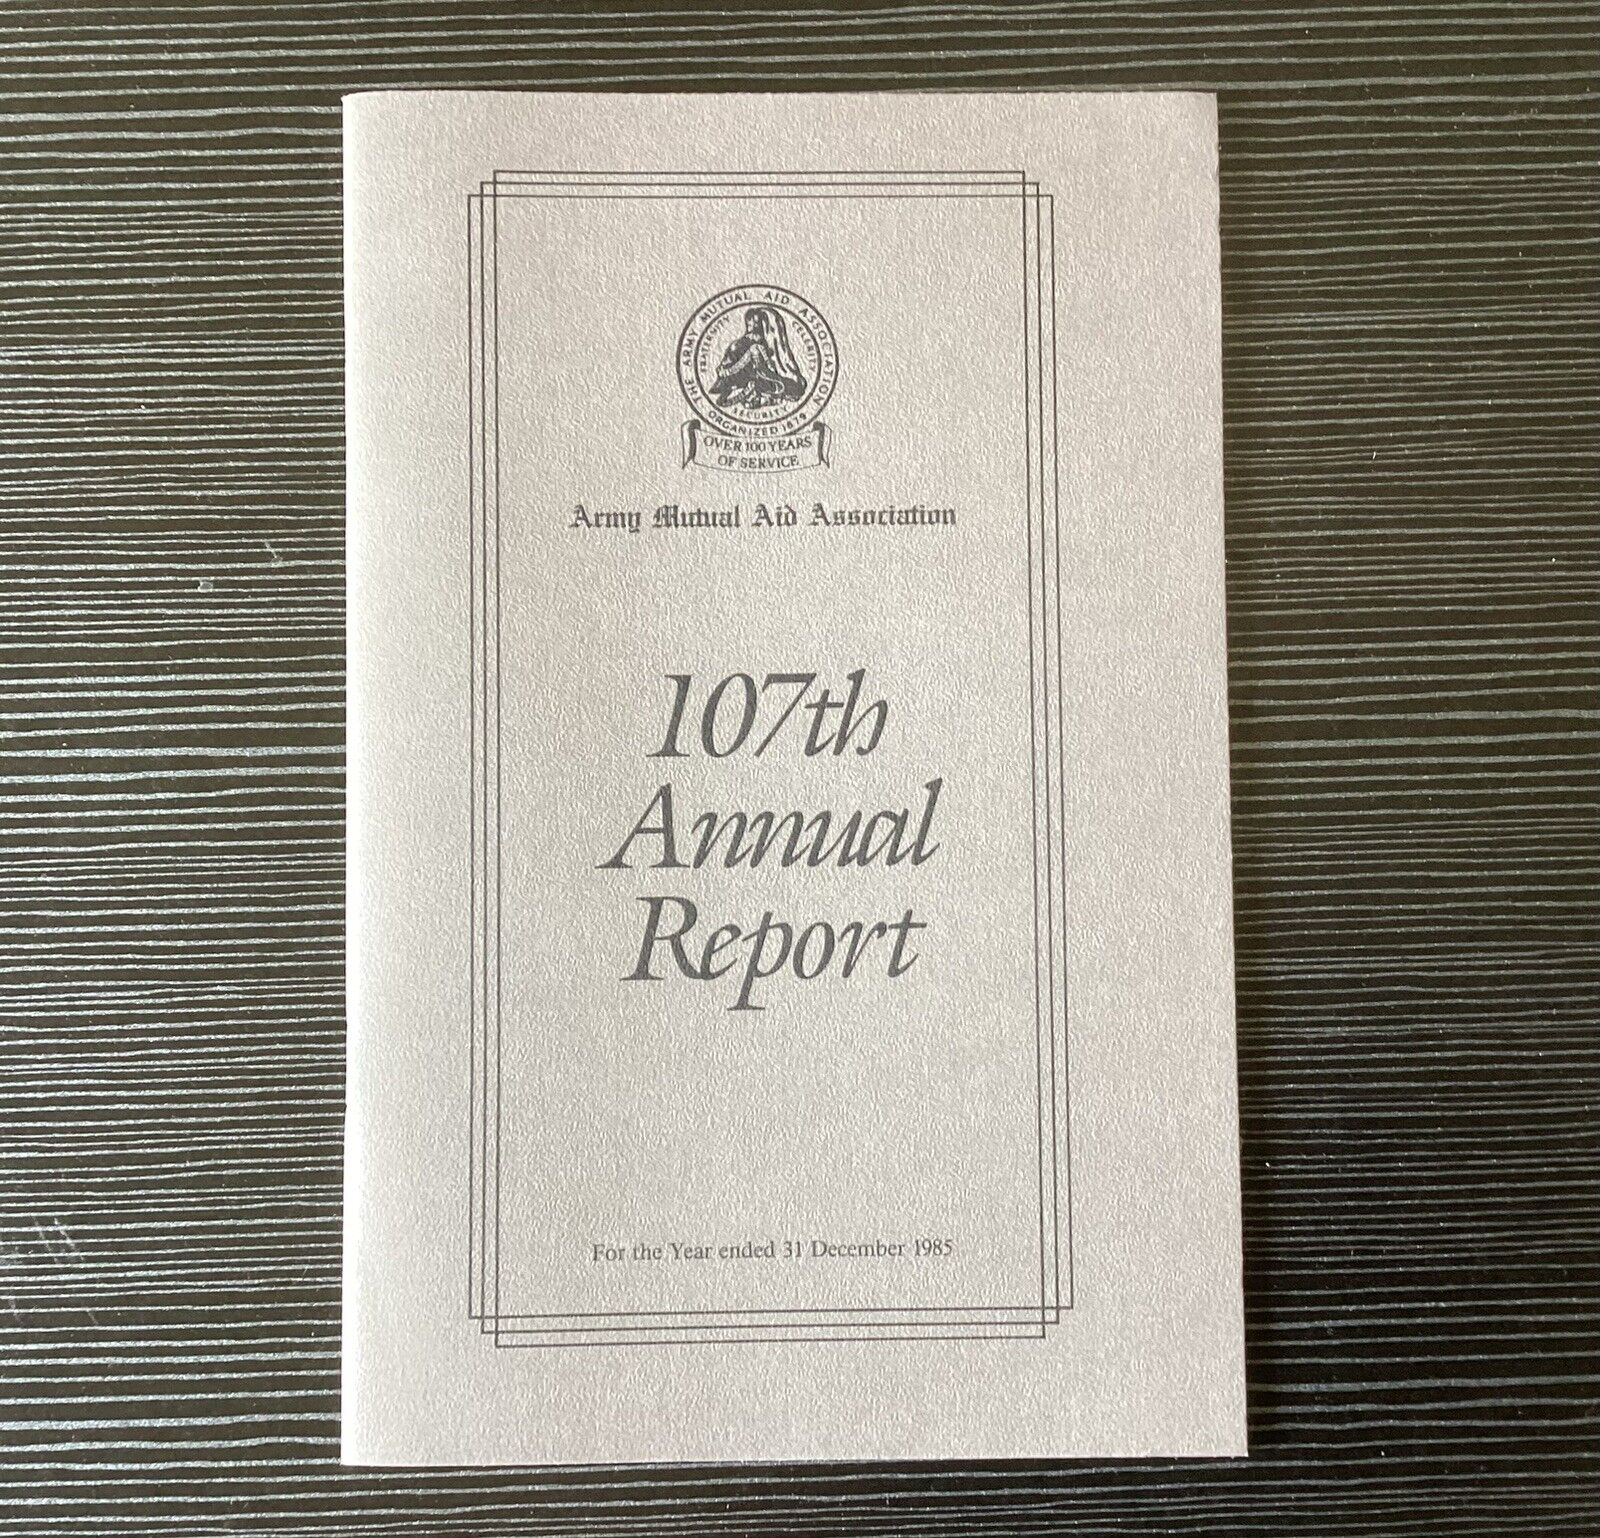 VTG The US Army Mutual Aid Association 107th Annual Report Booklet, 1985